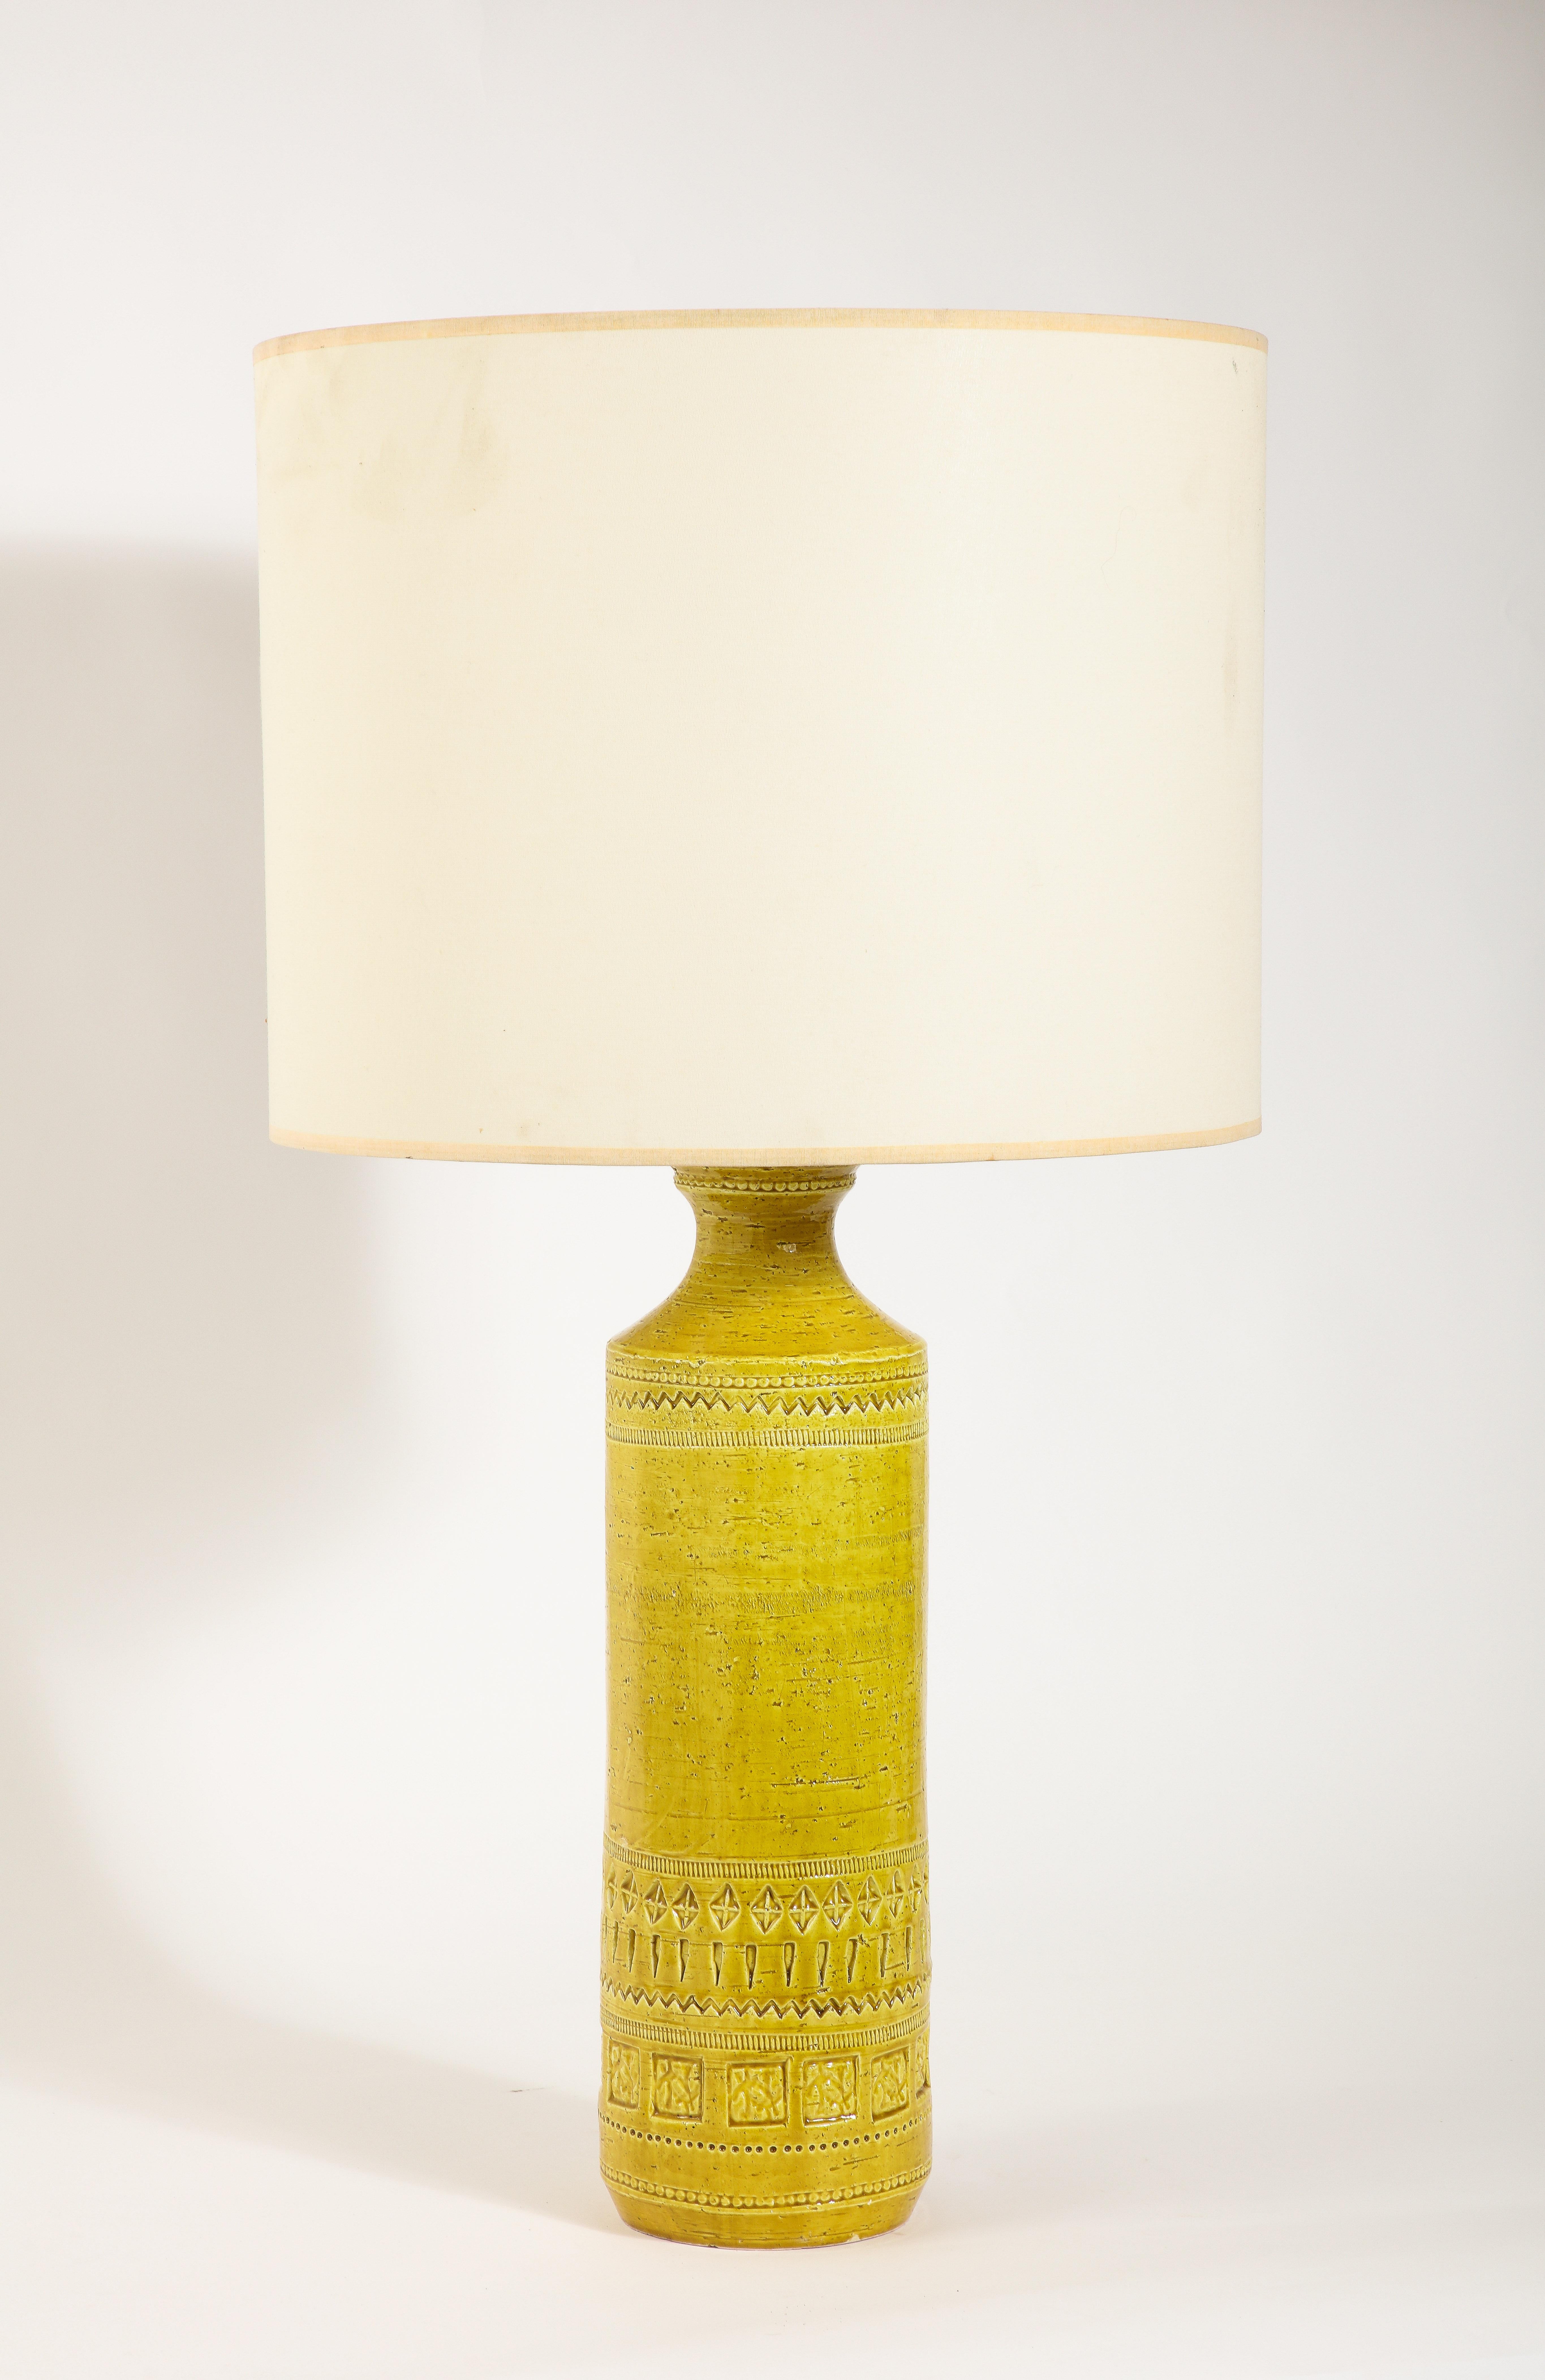 Large Incised ceramic table lamps with a rich yellow glaze.

25x7 Base Only